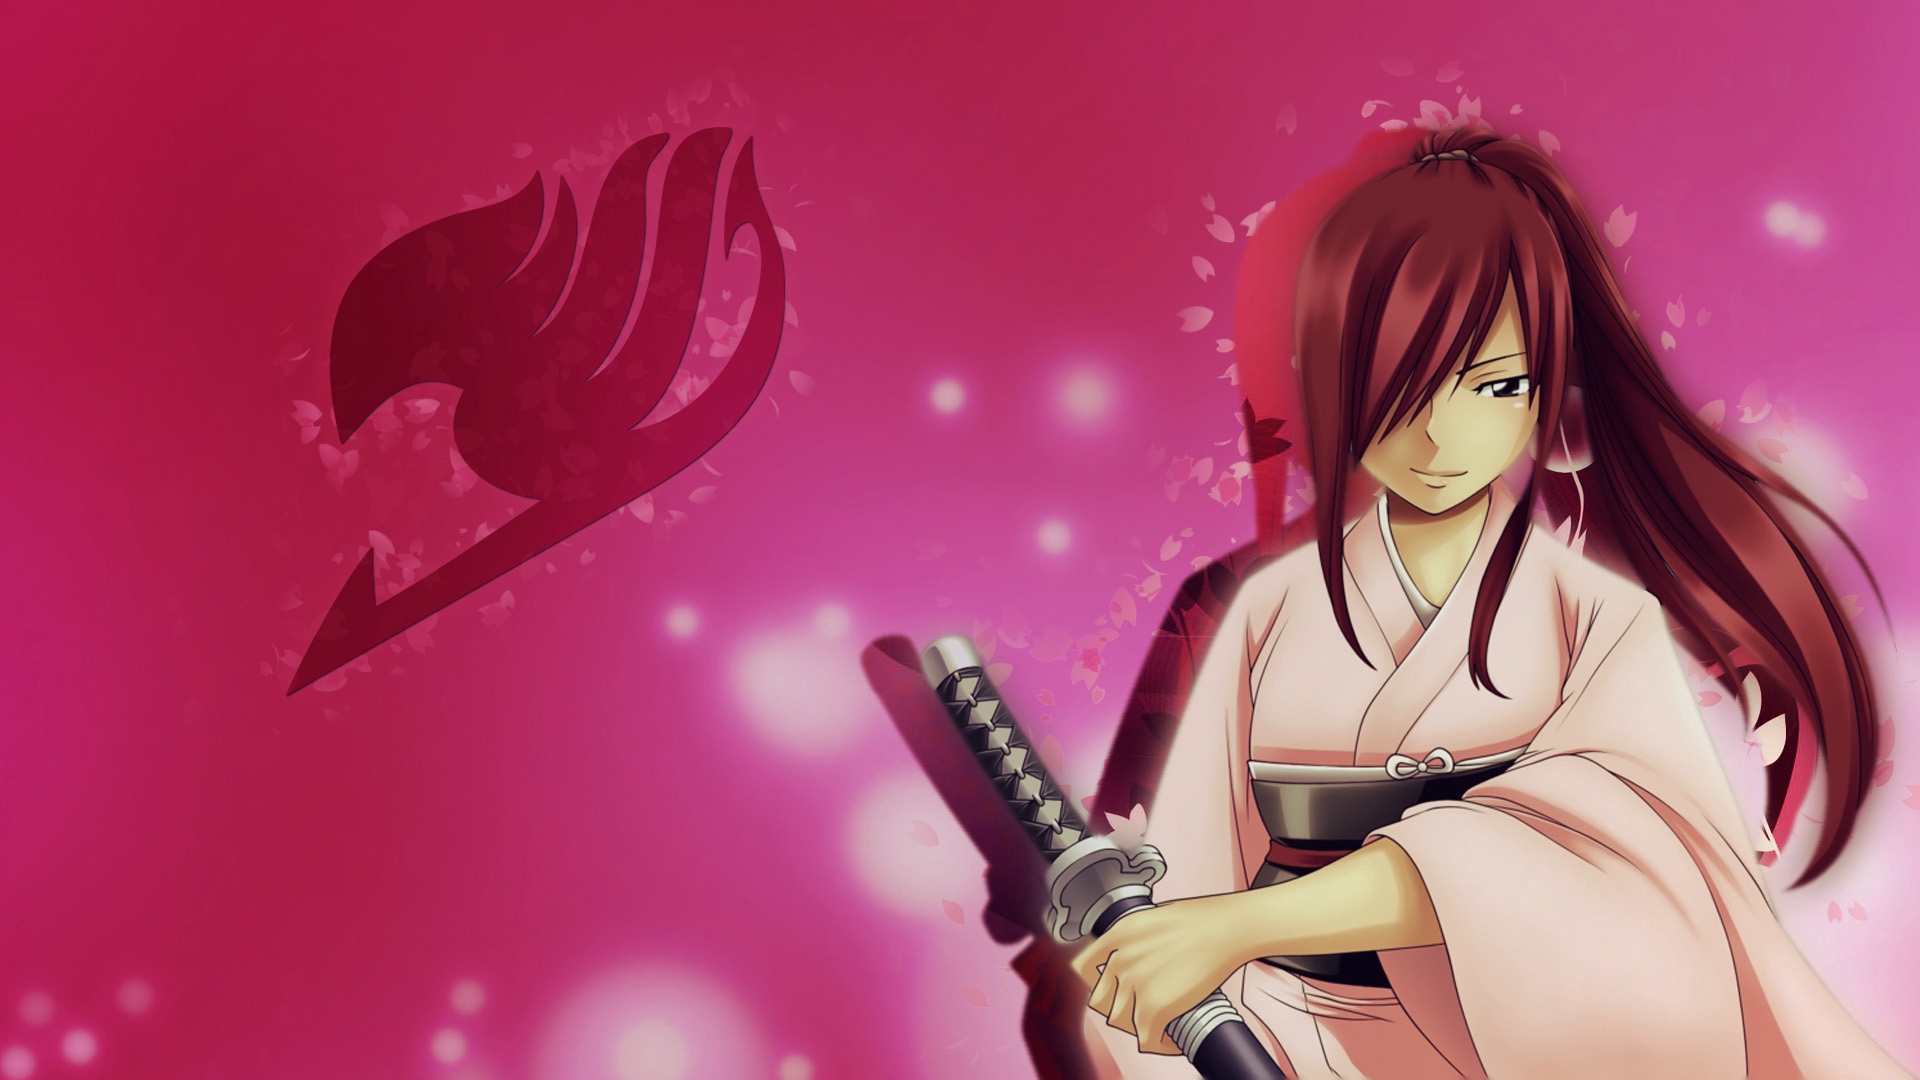 Wallpaper Erza Scarlet Fairy Tail Mage Sword